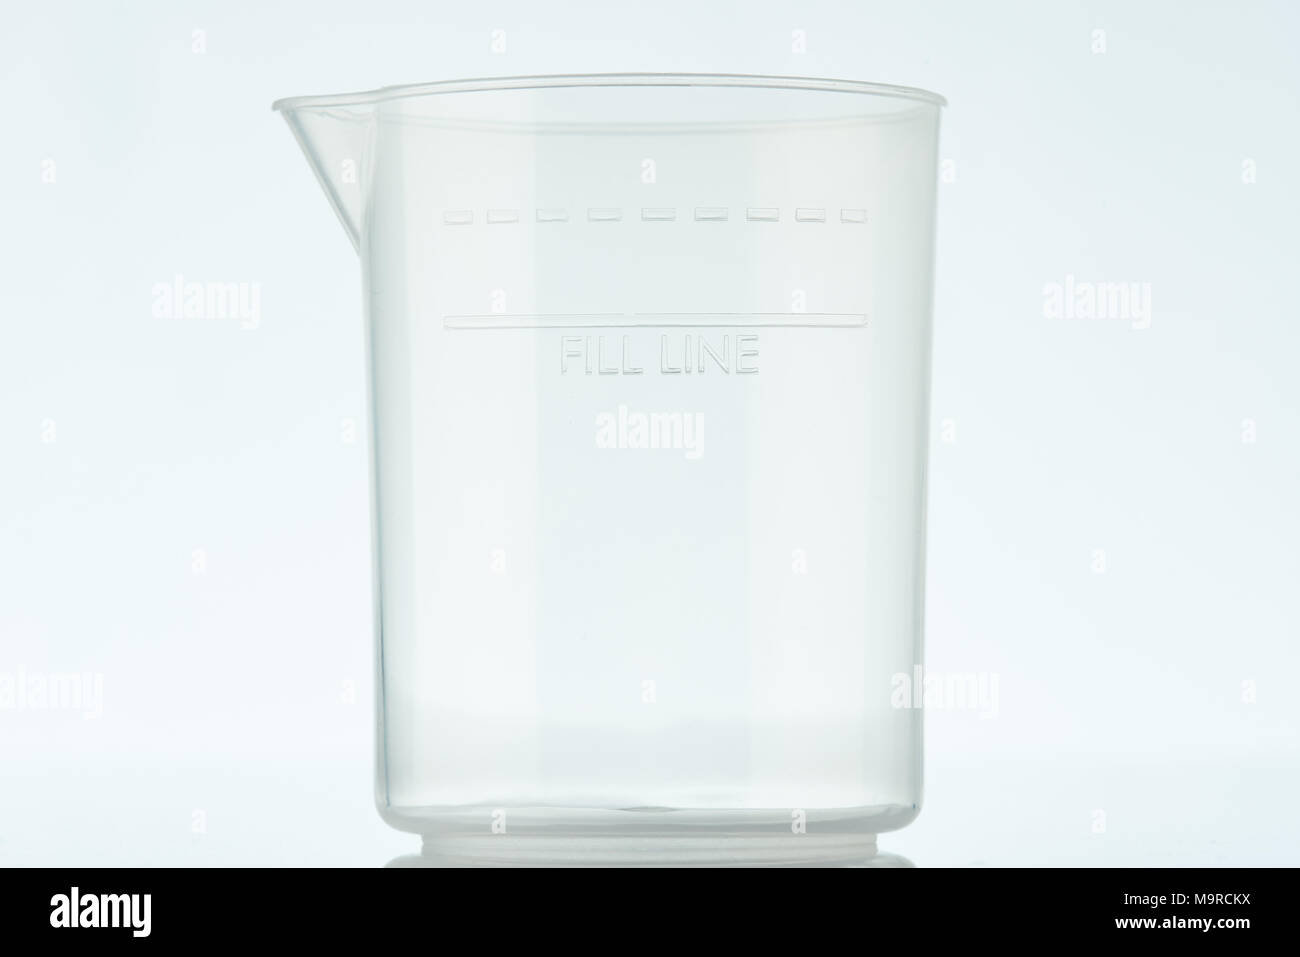 https://c8.alamy.com/comp/M9RCKX/one-clean-empty-cup-for-measuring-with-fill-line-isolated-on-white-background-M9RCKX.jpg